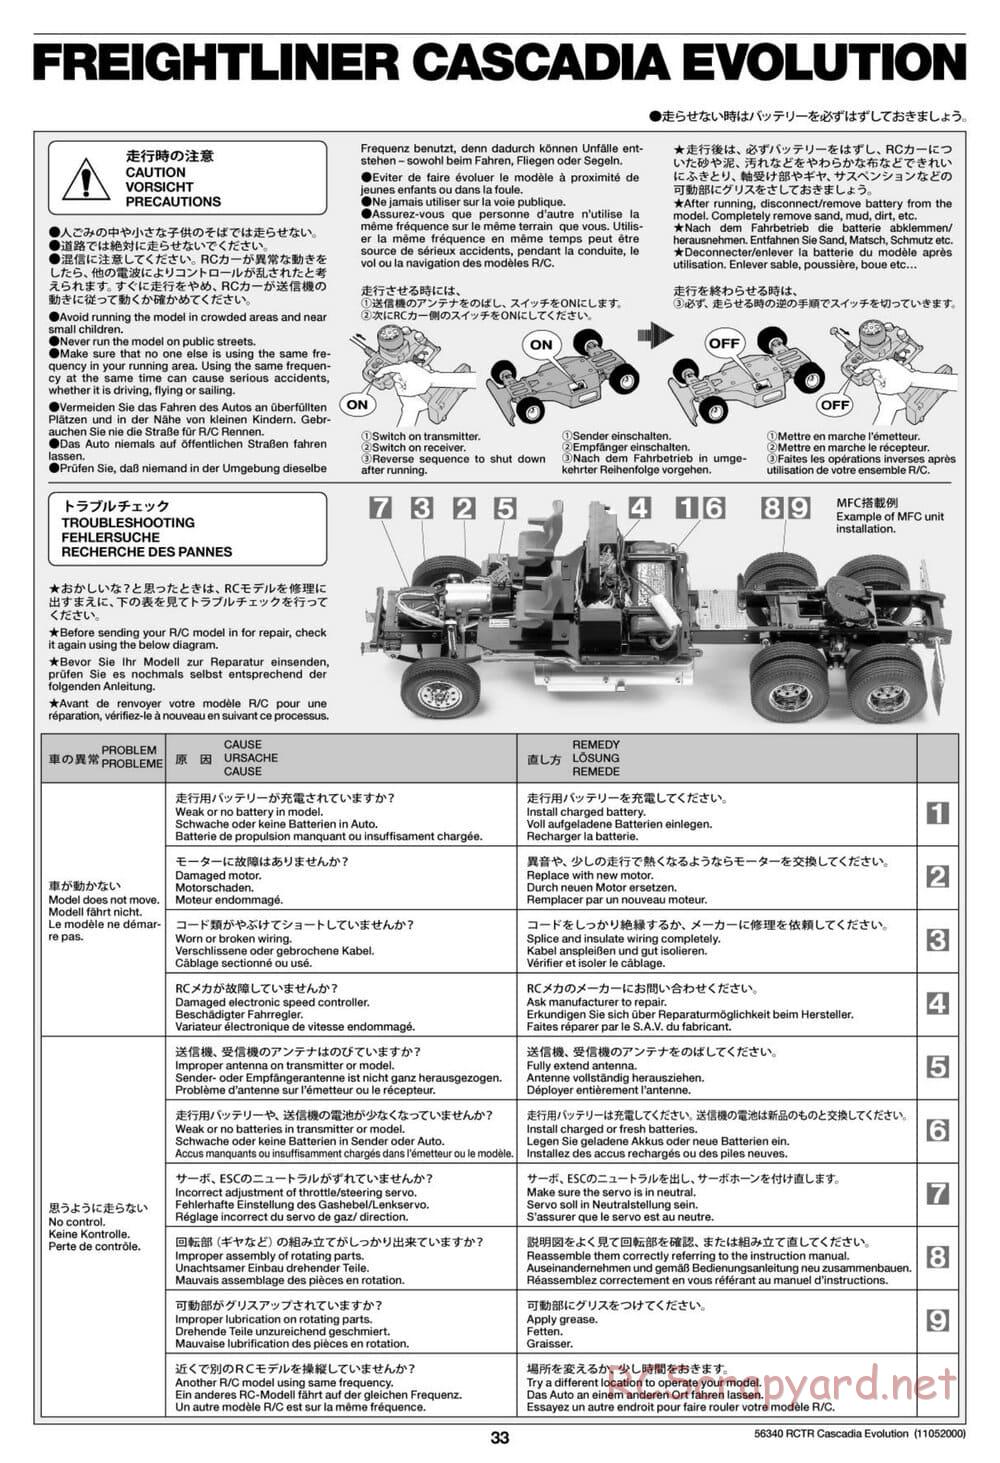 Tamiya - Freightliner Cascadia Evolution Tractor Truck Chassis - Manual - Page 33